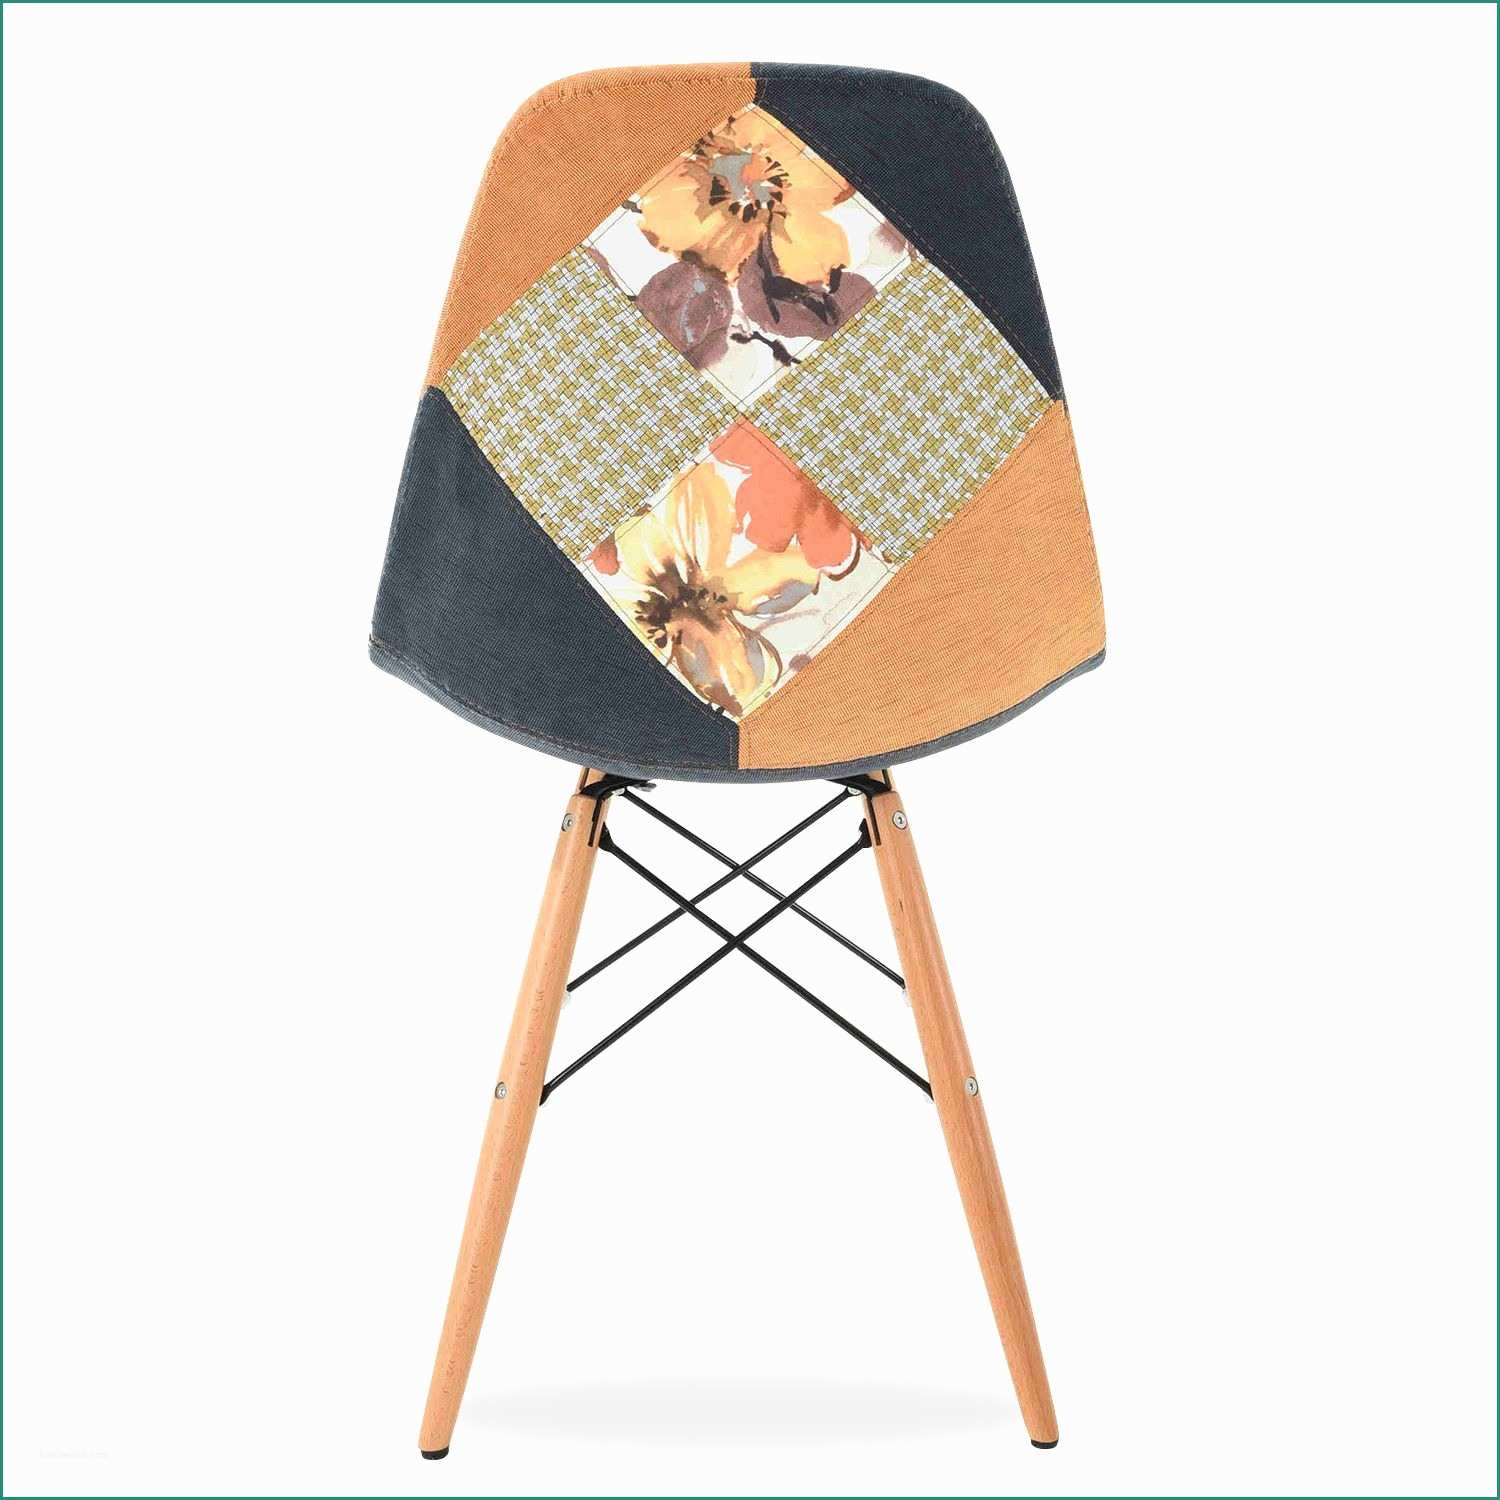 Sedia Dsw Charles Eames E Silla Wooden Flower Patchwork Sillas Patchwork Dsw